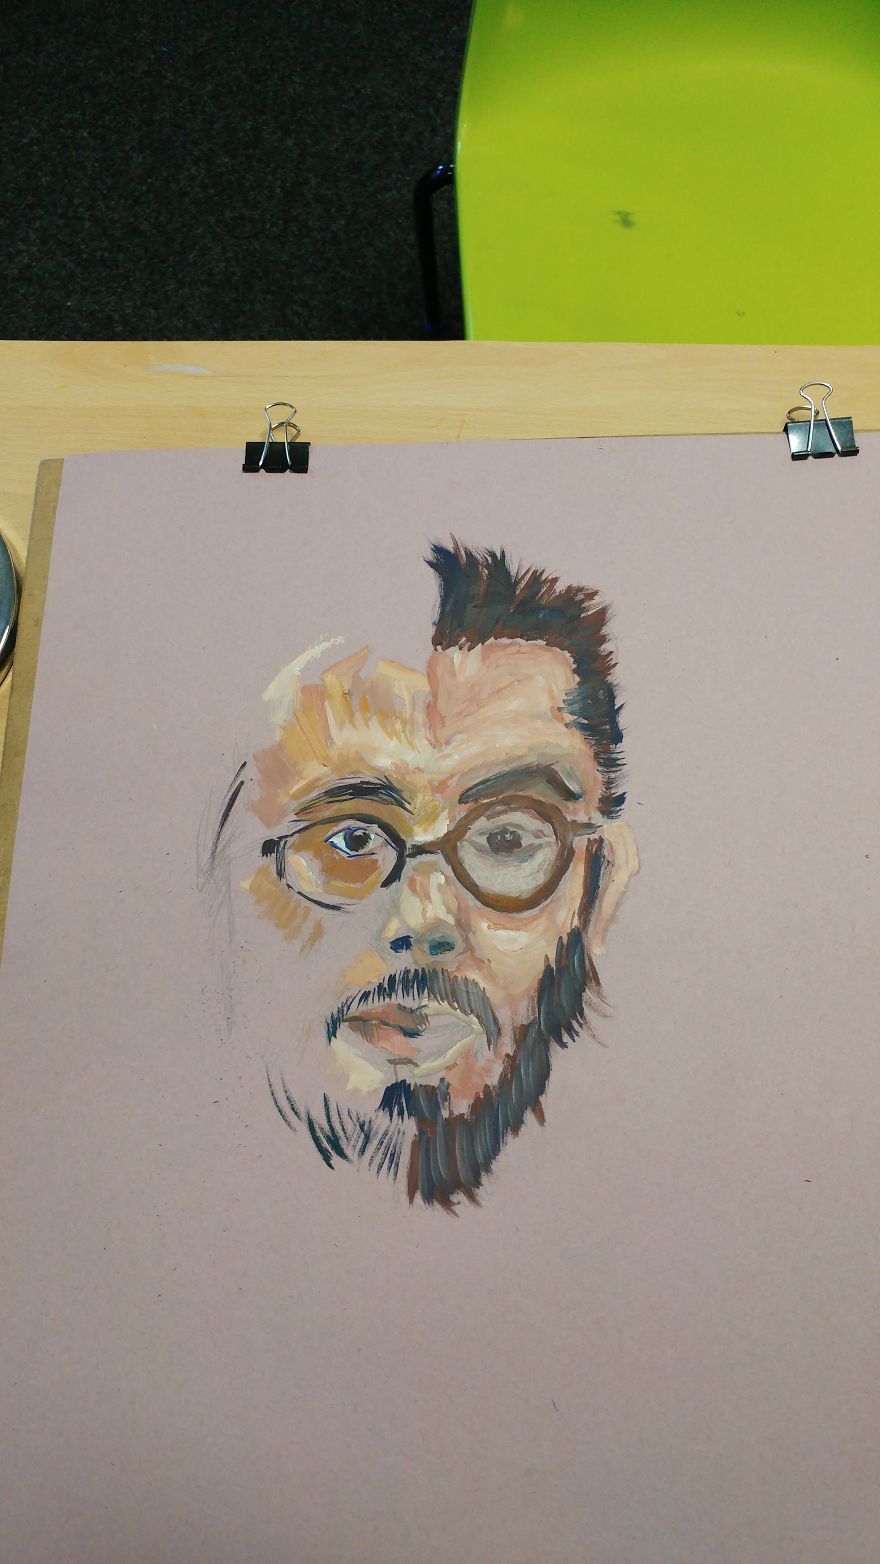 I Went To An Oil Painting Class, My Instructor Had Me Paint Half A Self Portrait. Here Are The Results.